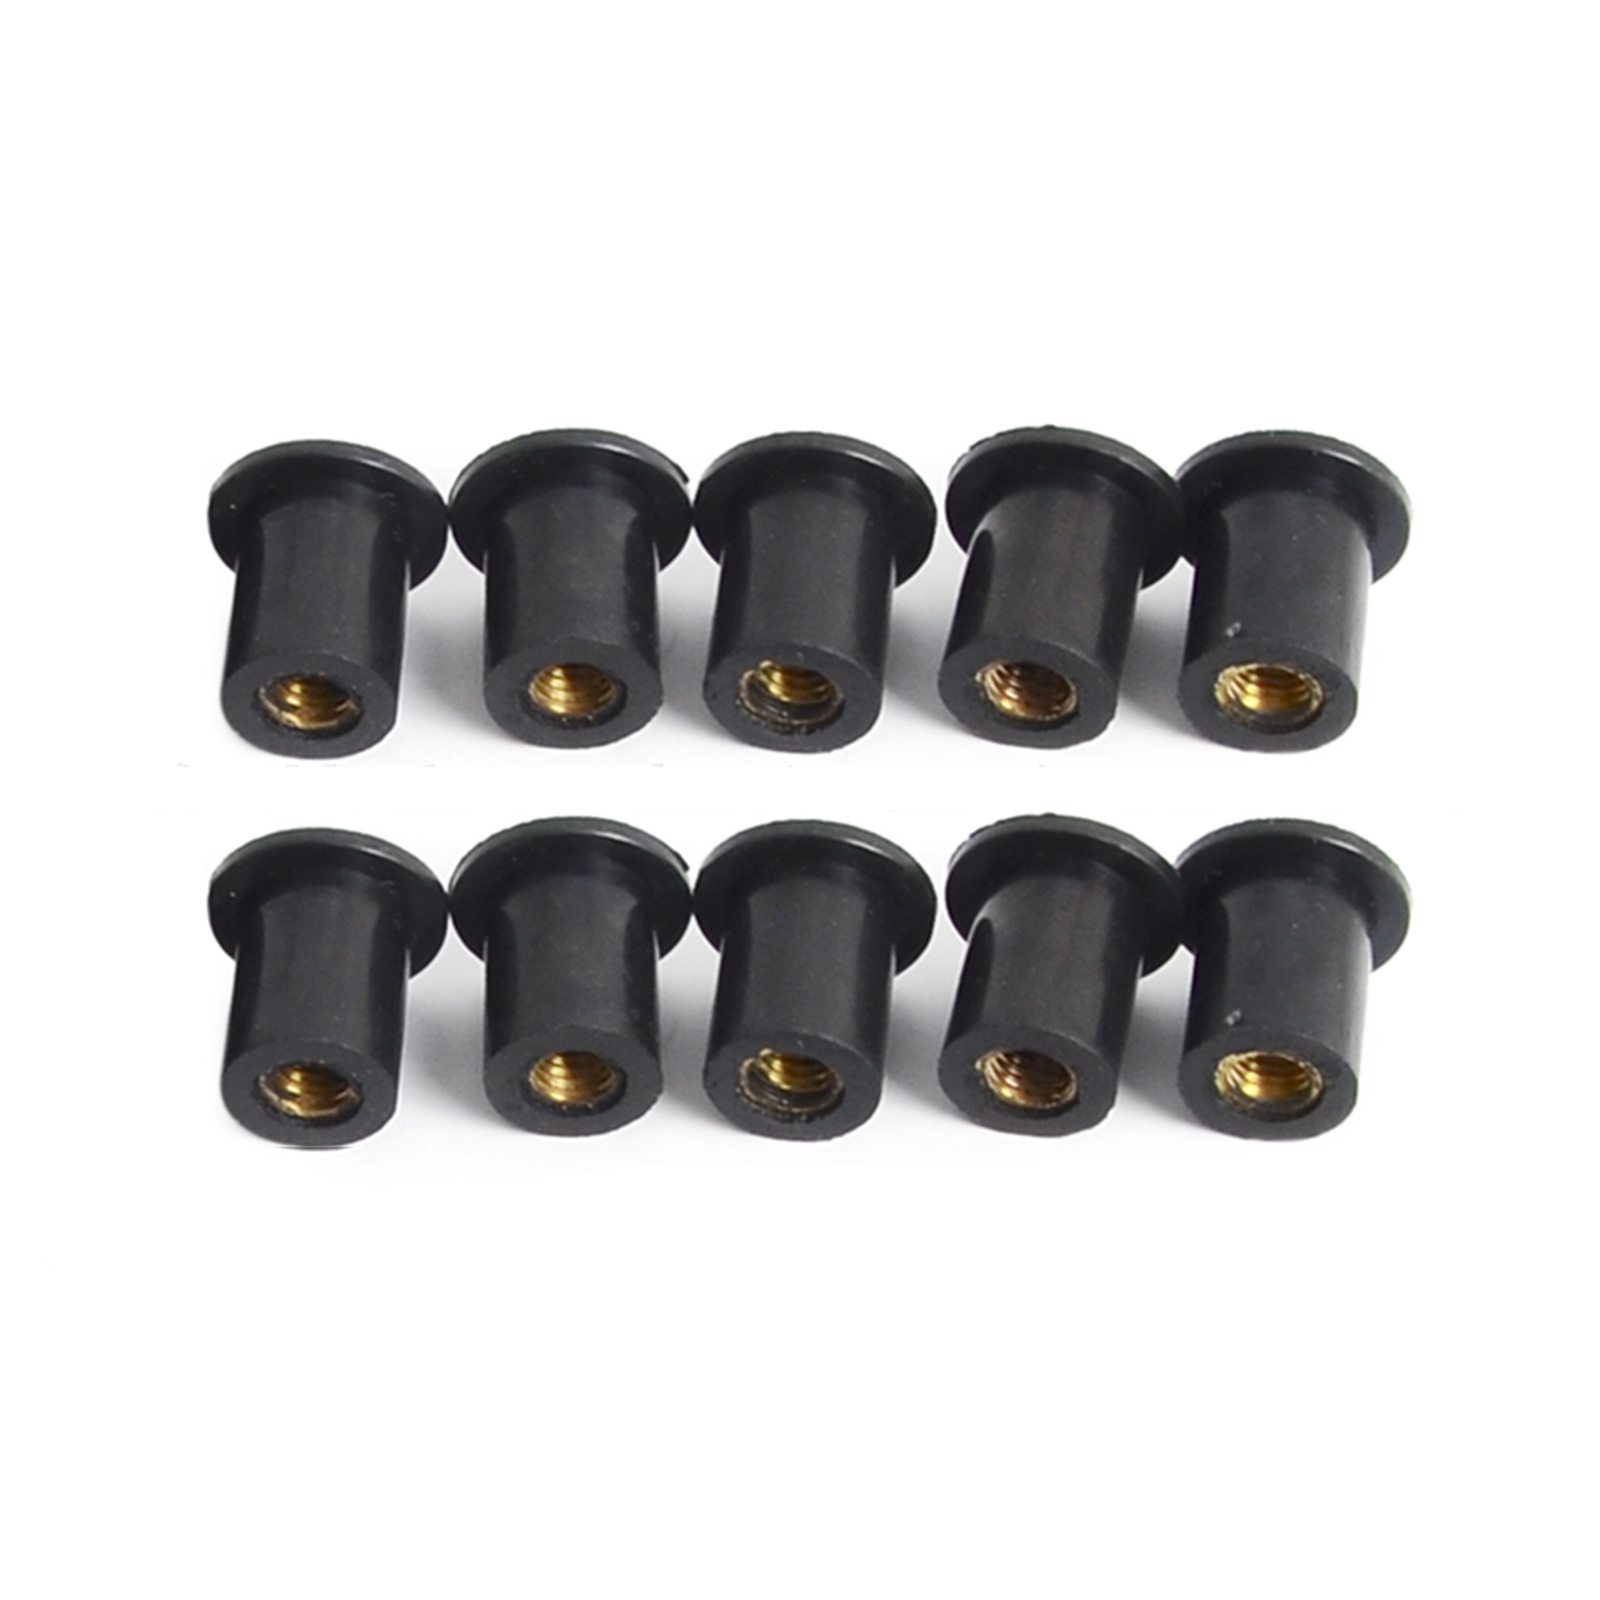 10Pcs M4 / M5 / M6 Metric Rubber Well Nuts Windscreen Windshield Fairing Cowls Fastener Screws Universal Motorcycle Fairing Cowl Fixing - Auto GoShop